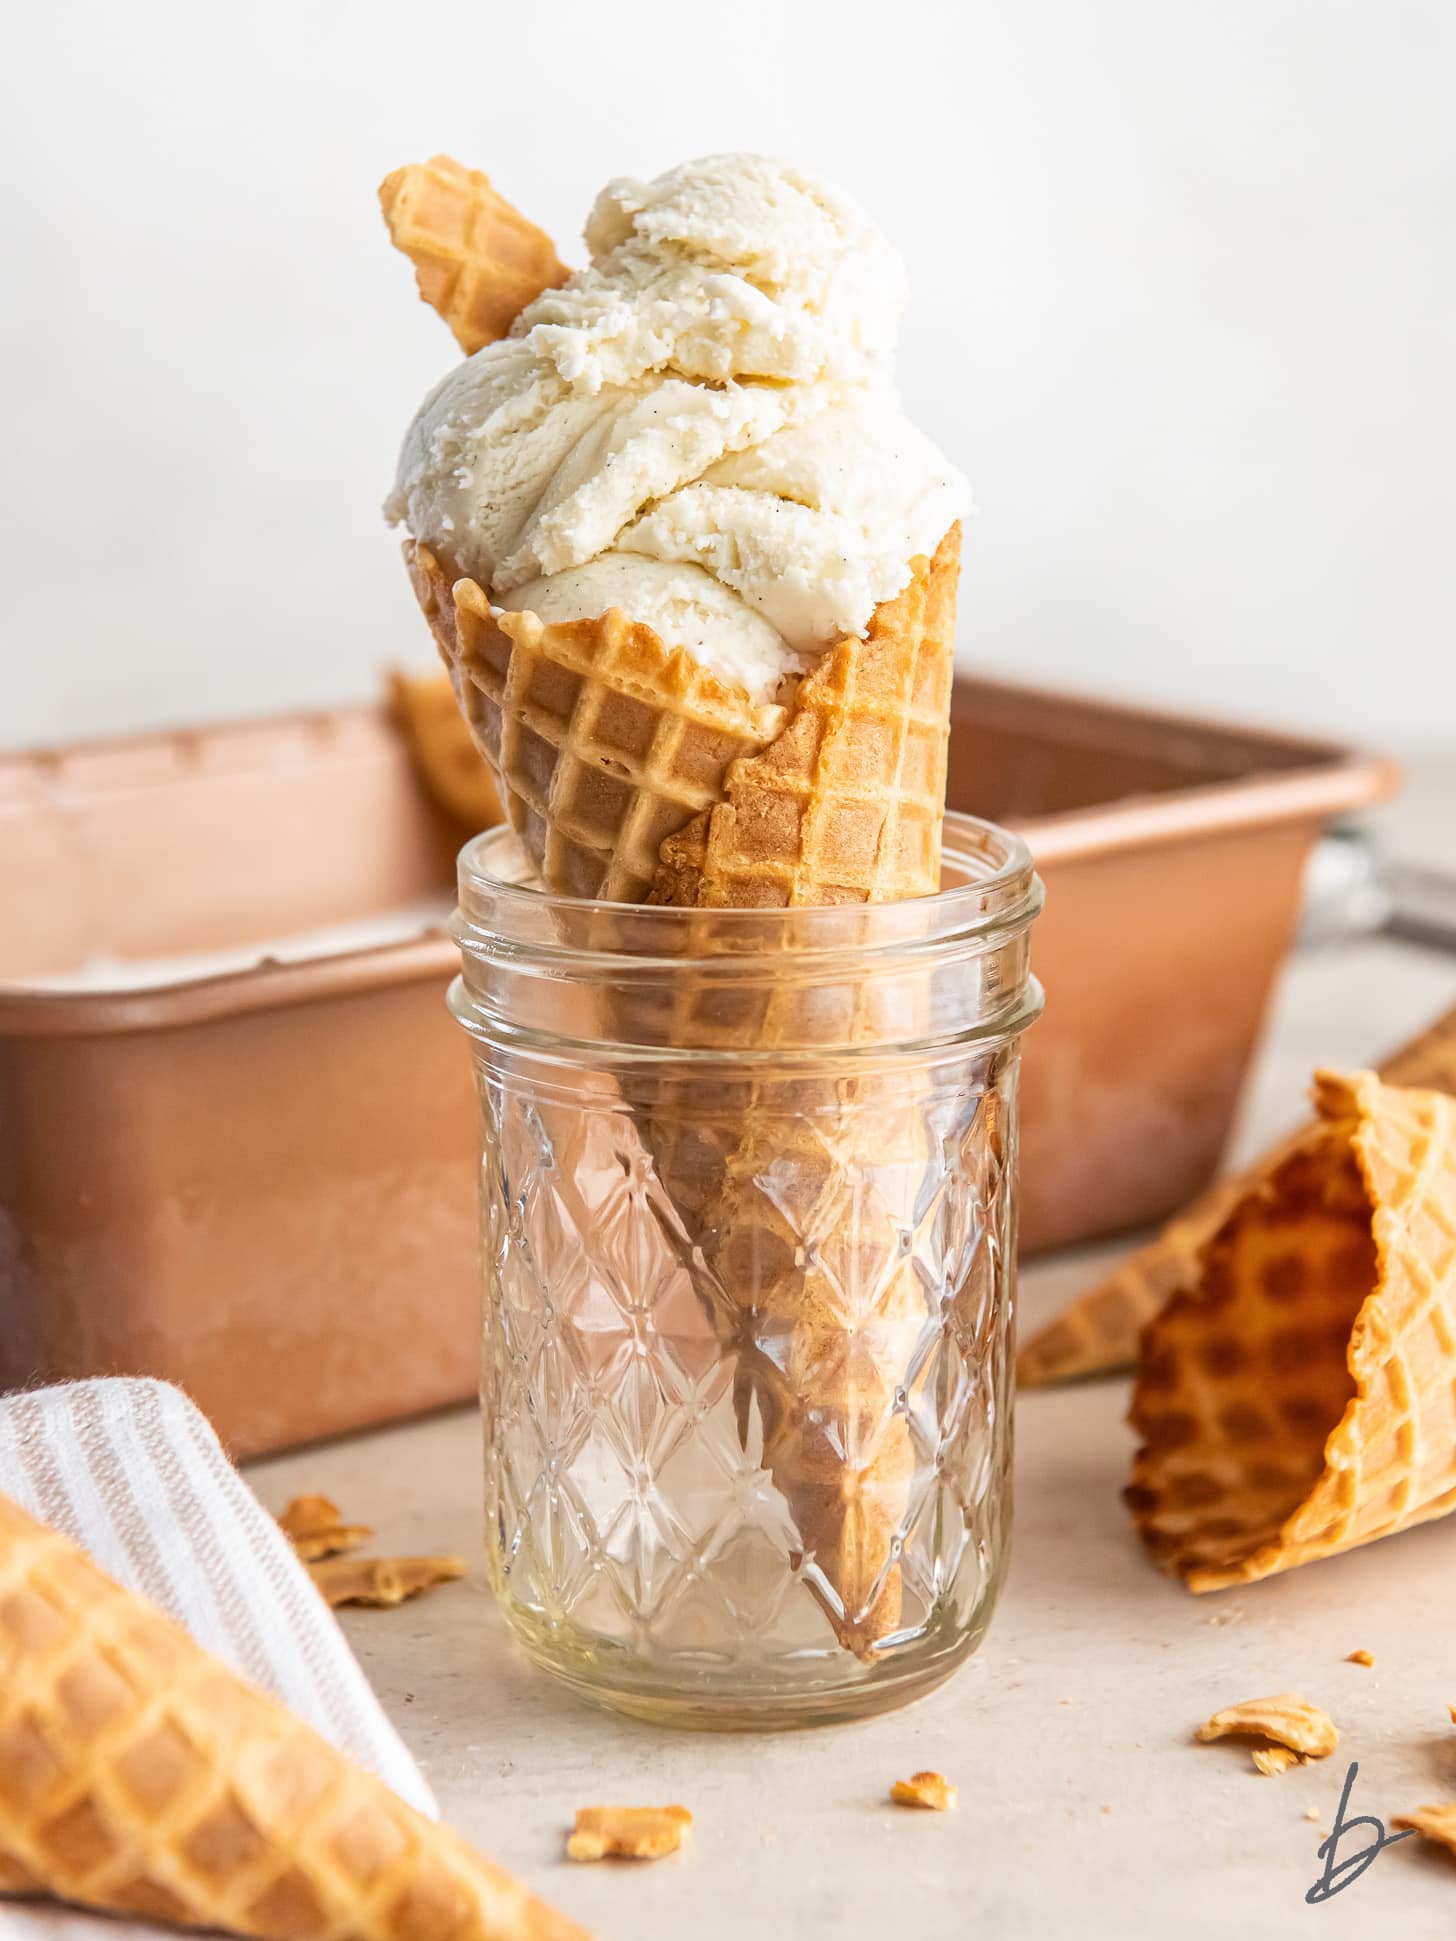 homemade vanilla ice cream in a waffle cone held up in a glass jar.